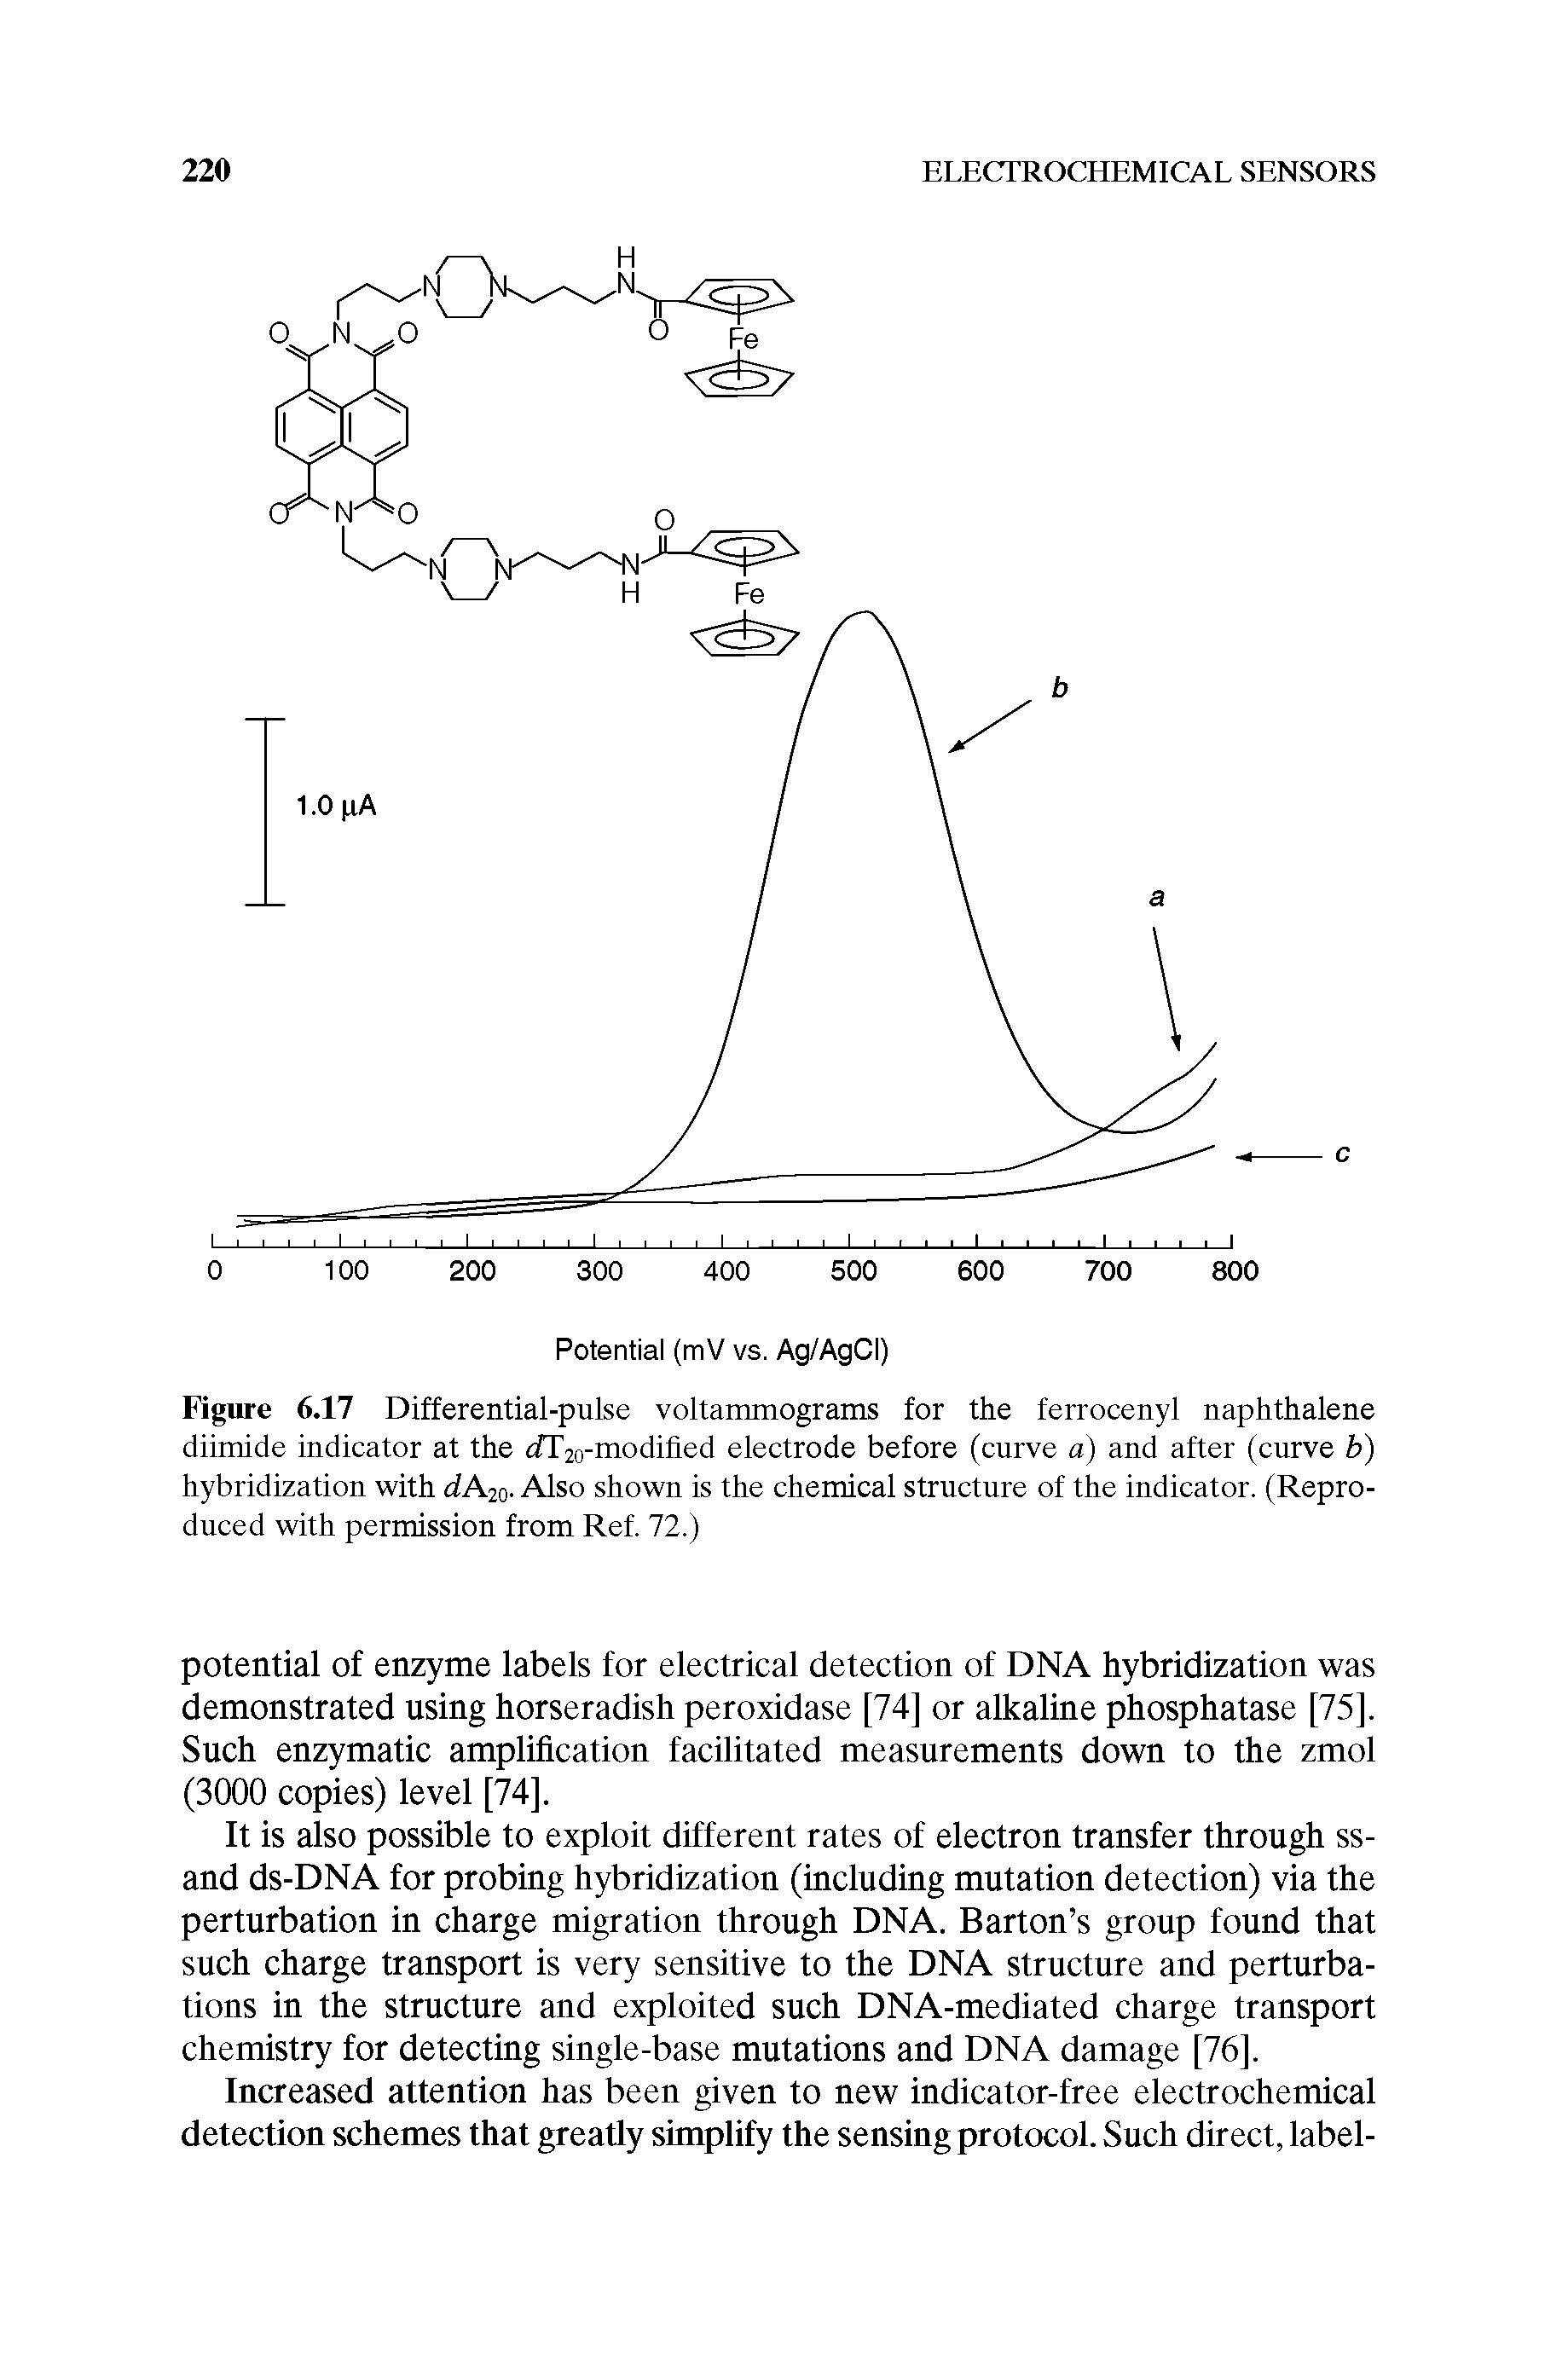 Figure 6.17 Differential-pulse voltammograms for the ferrocenyl naphthalene diimide indicator at the fiTlVmodified electrode before (curve a) and after (curve b) hybridization with dA2o- Also shown is the chemical structure of the indicator. (Reproduced with permission from Ref. 72.)...